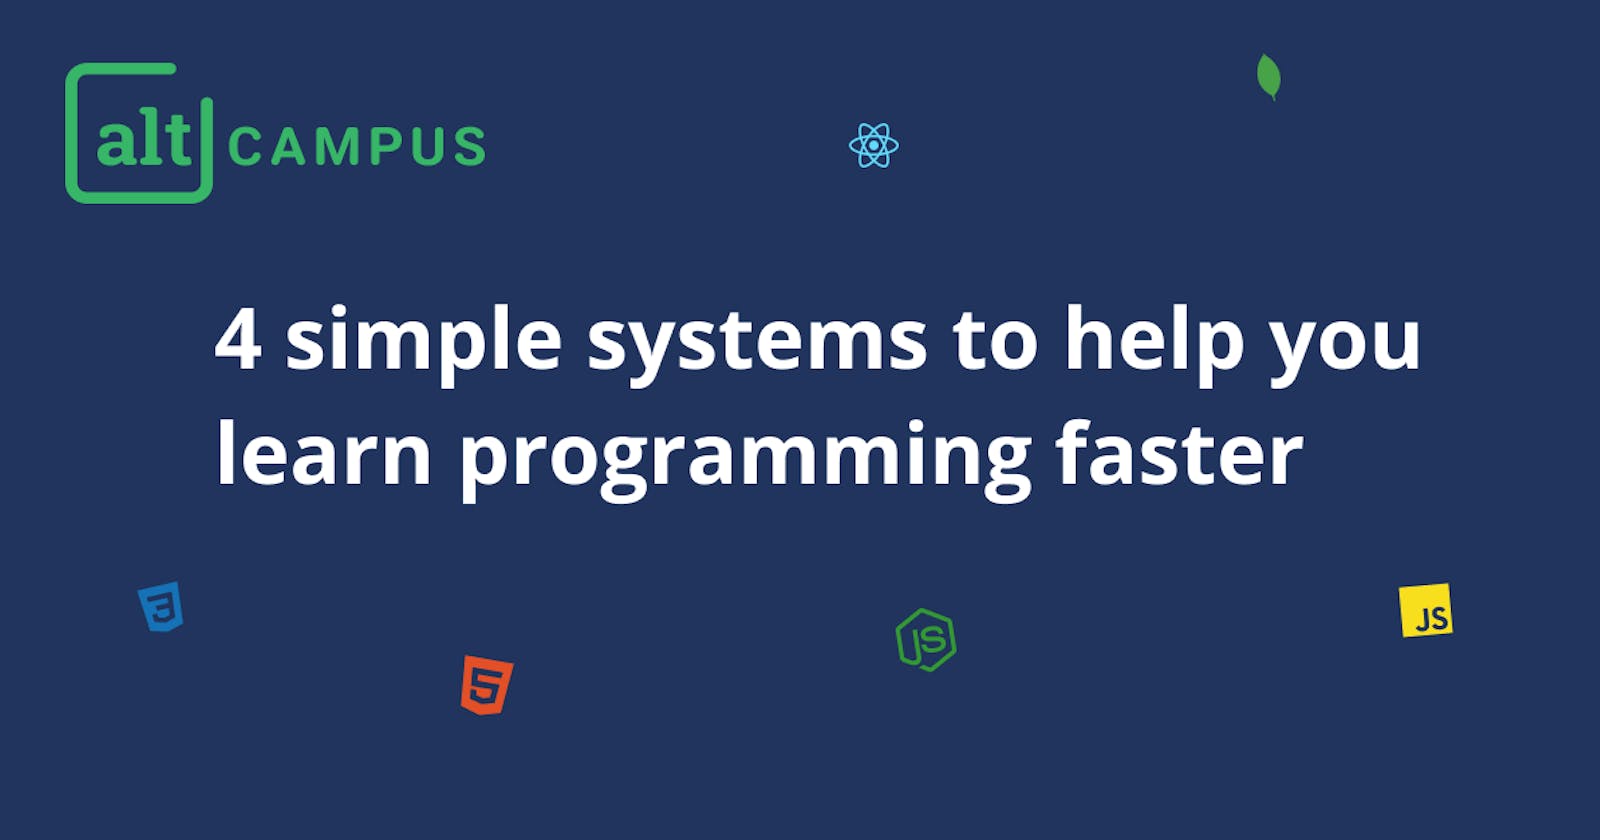 4 simple systems to help you learn programming faster